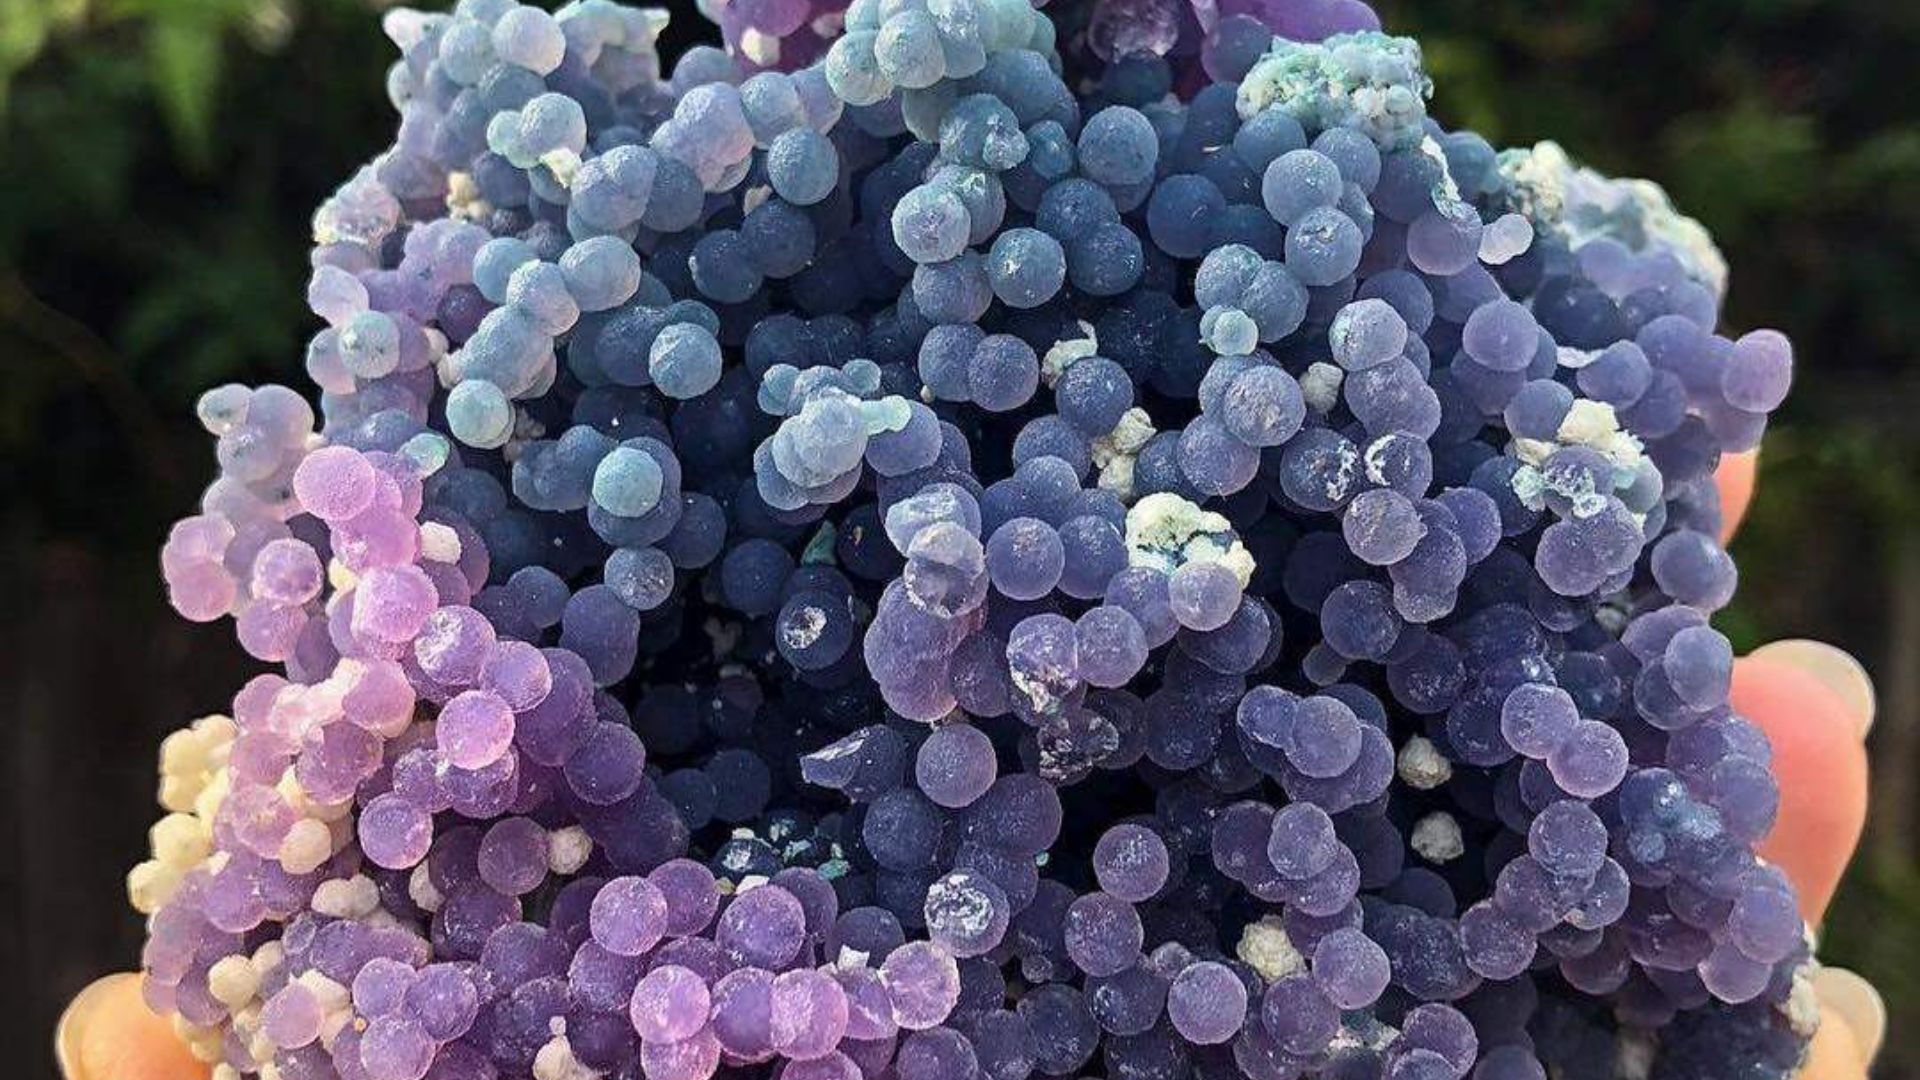  Purple agate In Shape Of Grapes